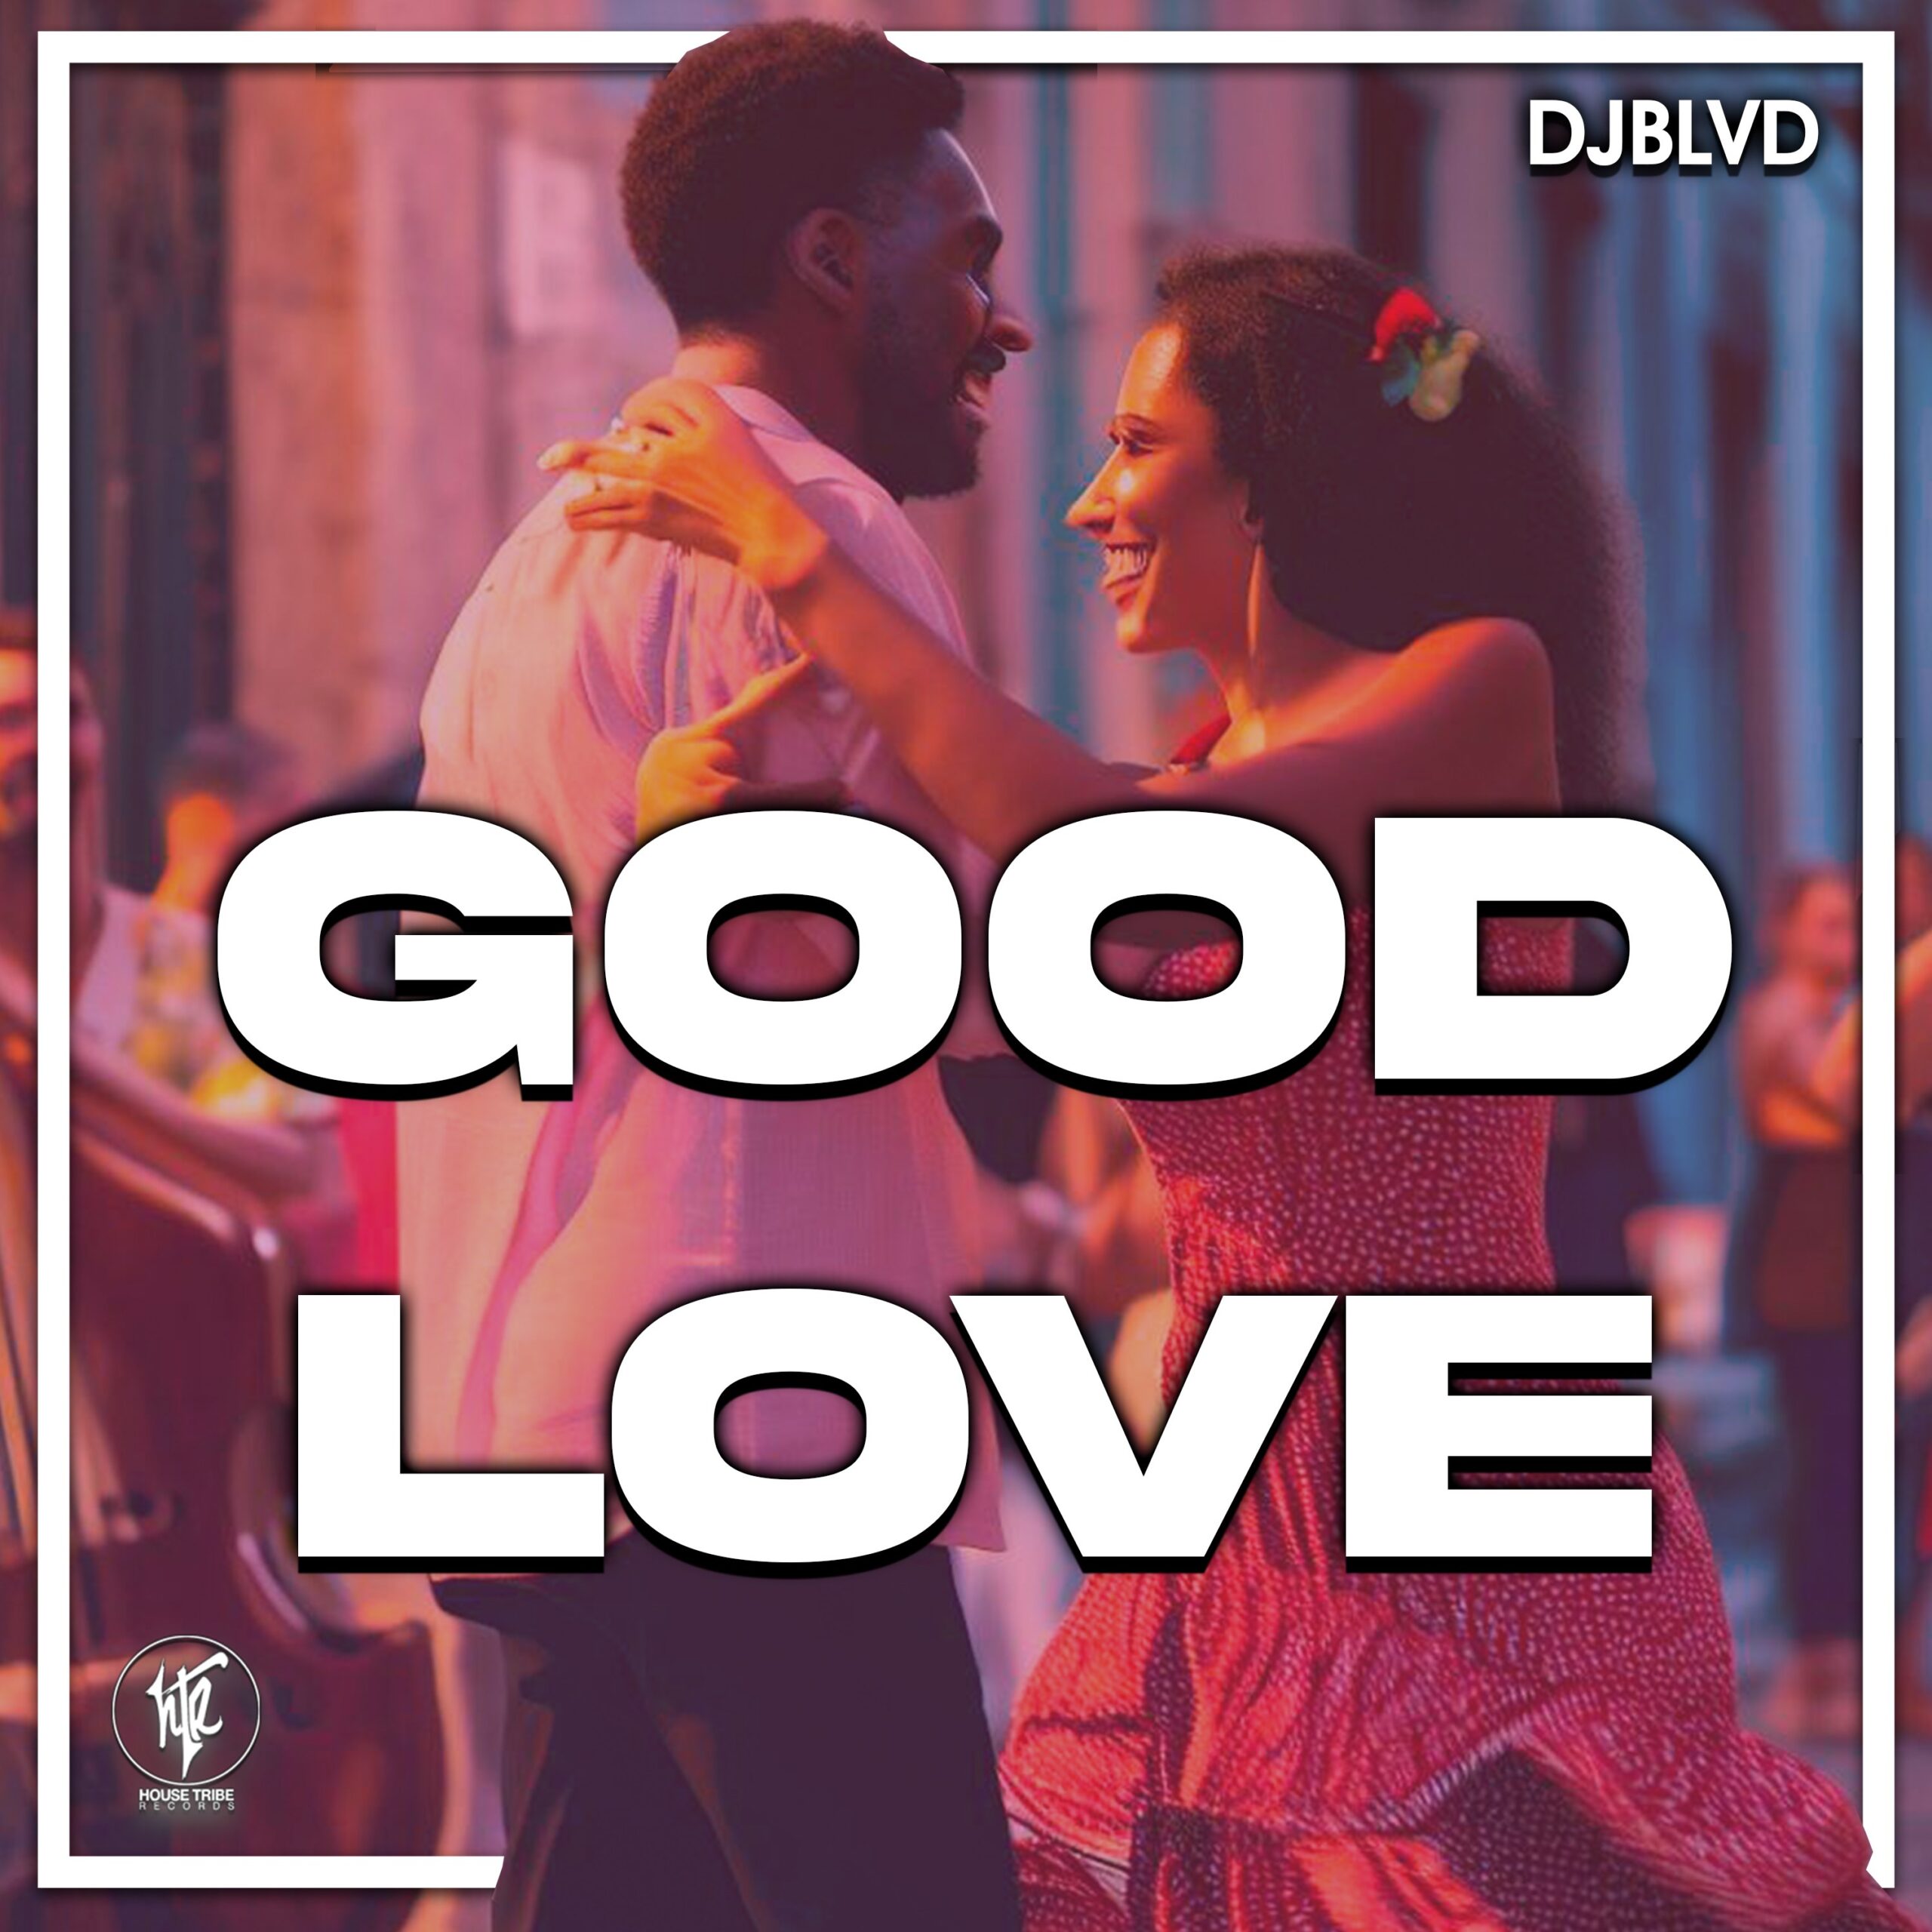 byDJBLVD Shines with His New Track 'Good Love'